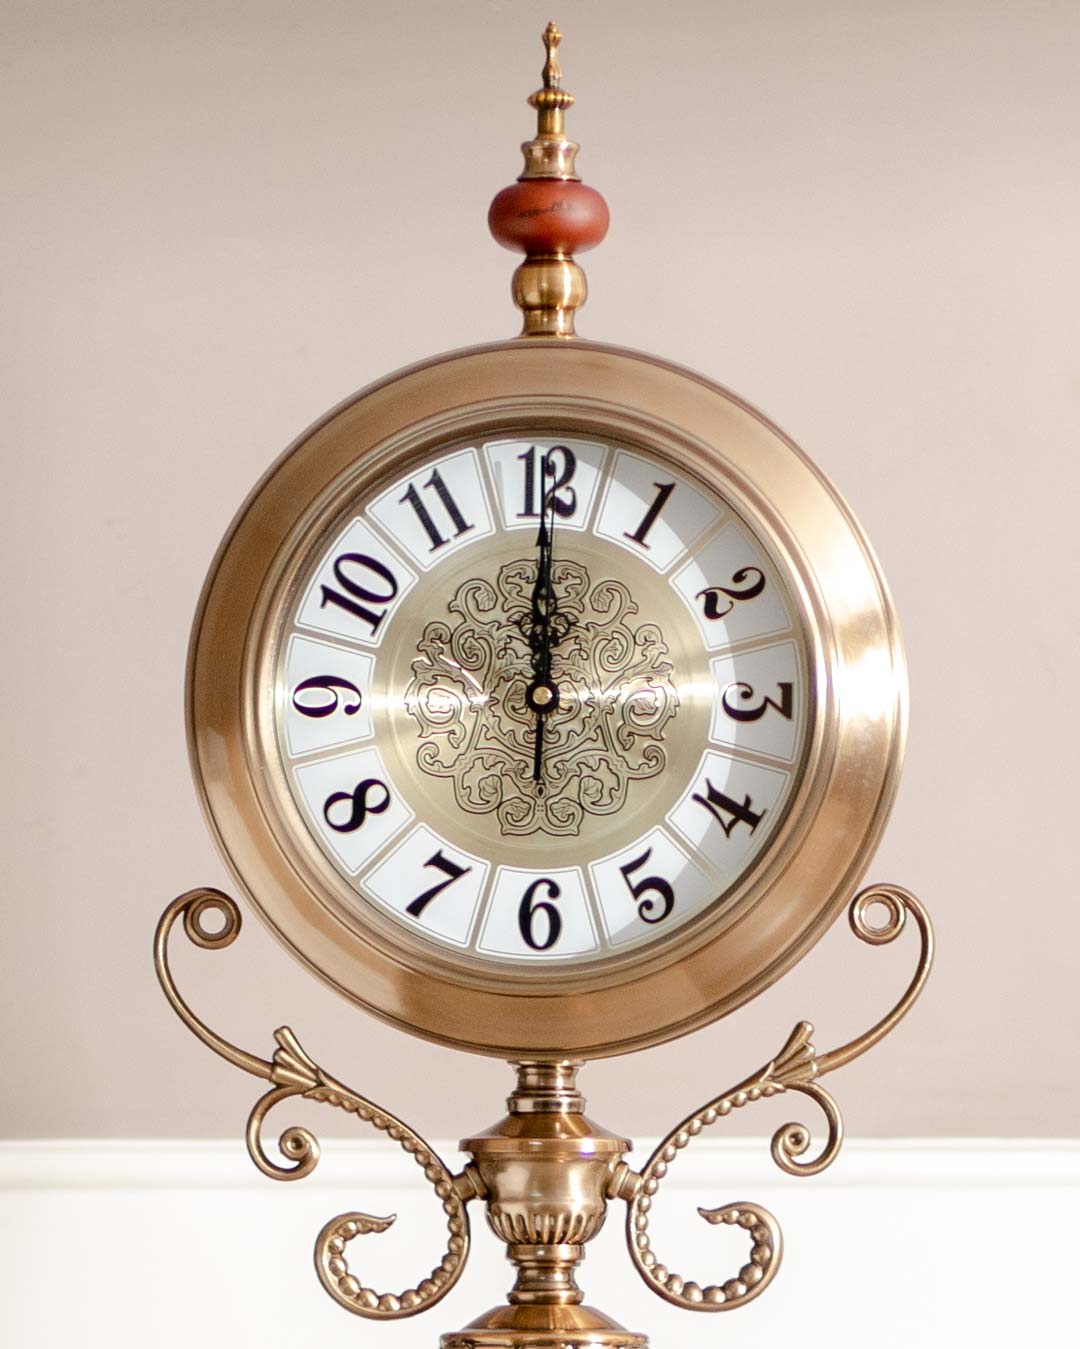 Tall 'Seville' standing clock with ornate gold finish and Roman numerals, perfect as a living room centerpiece.